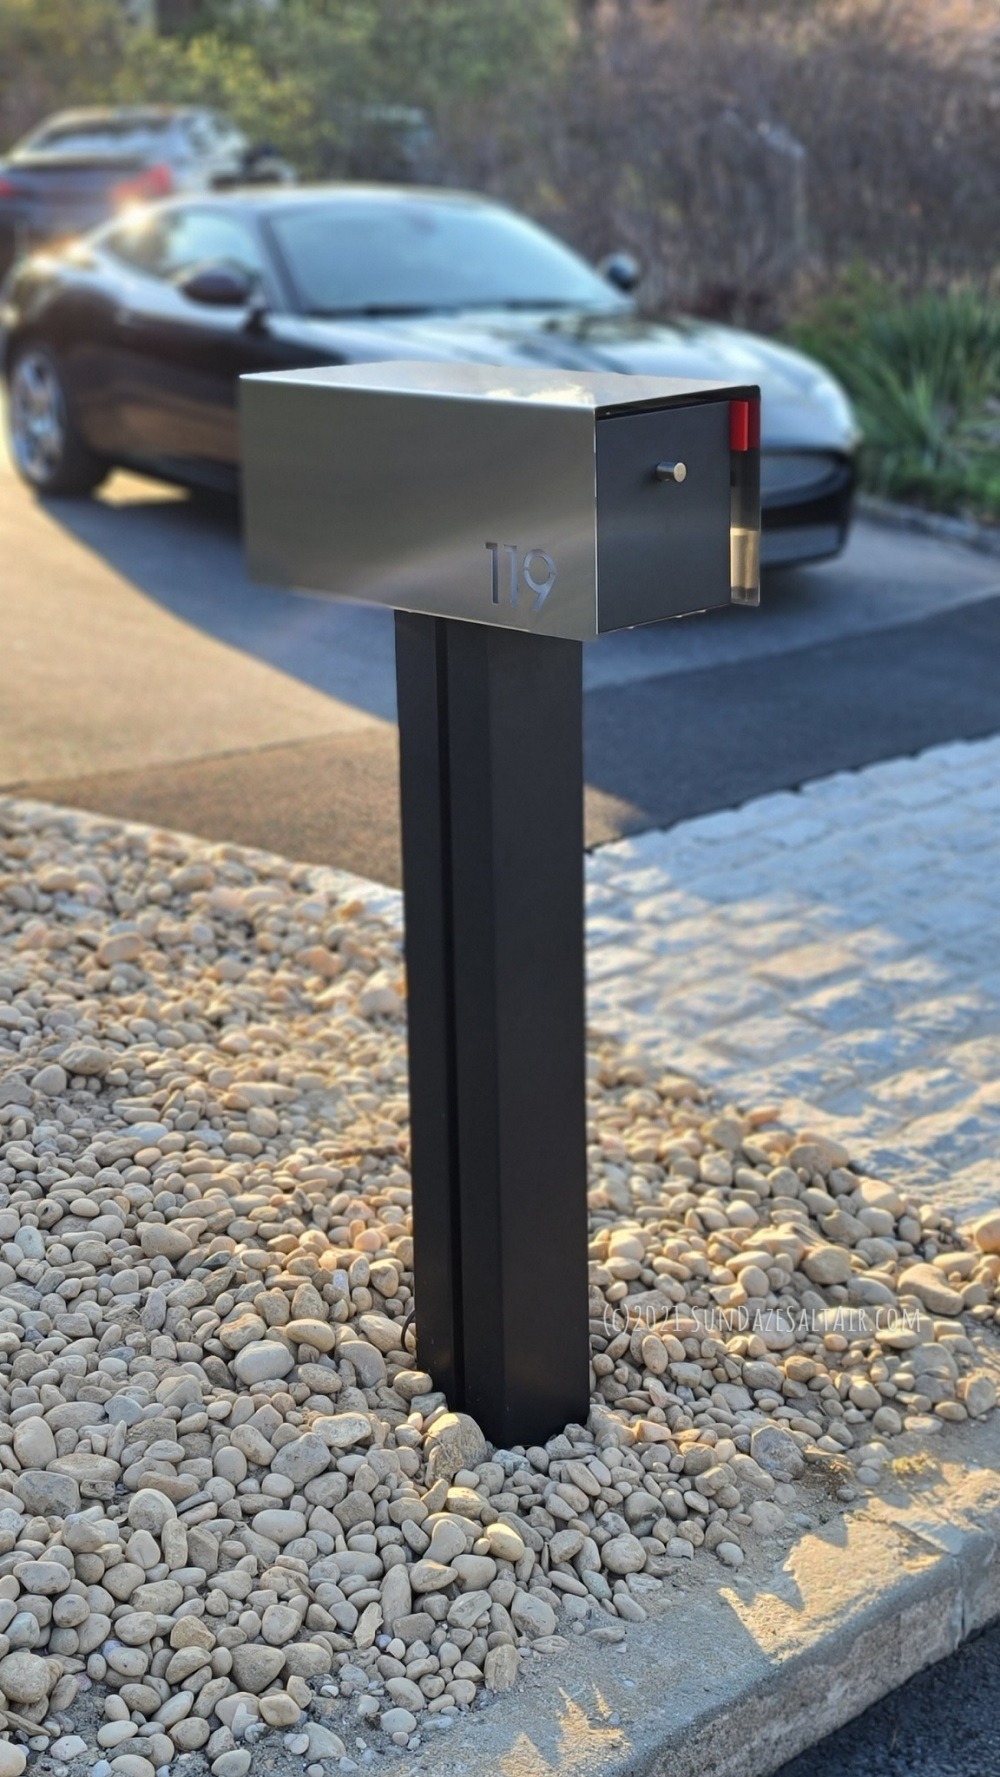 The best colorful landscape lighting ideas include highlighting property features you wish to stand out like this sleek, contemporary mailbox